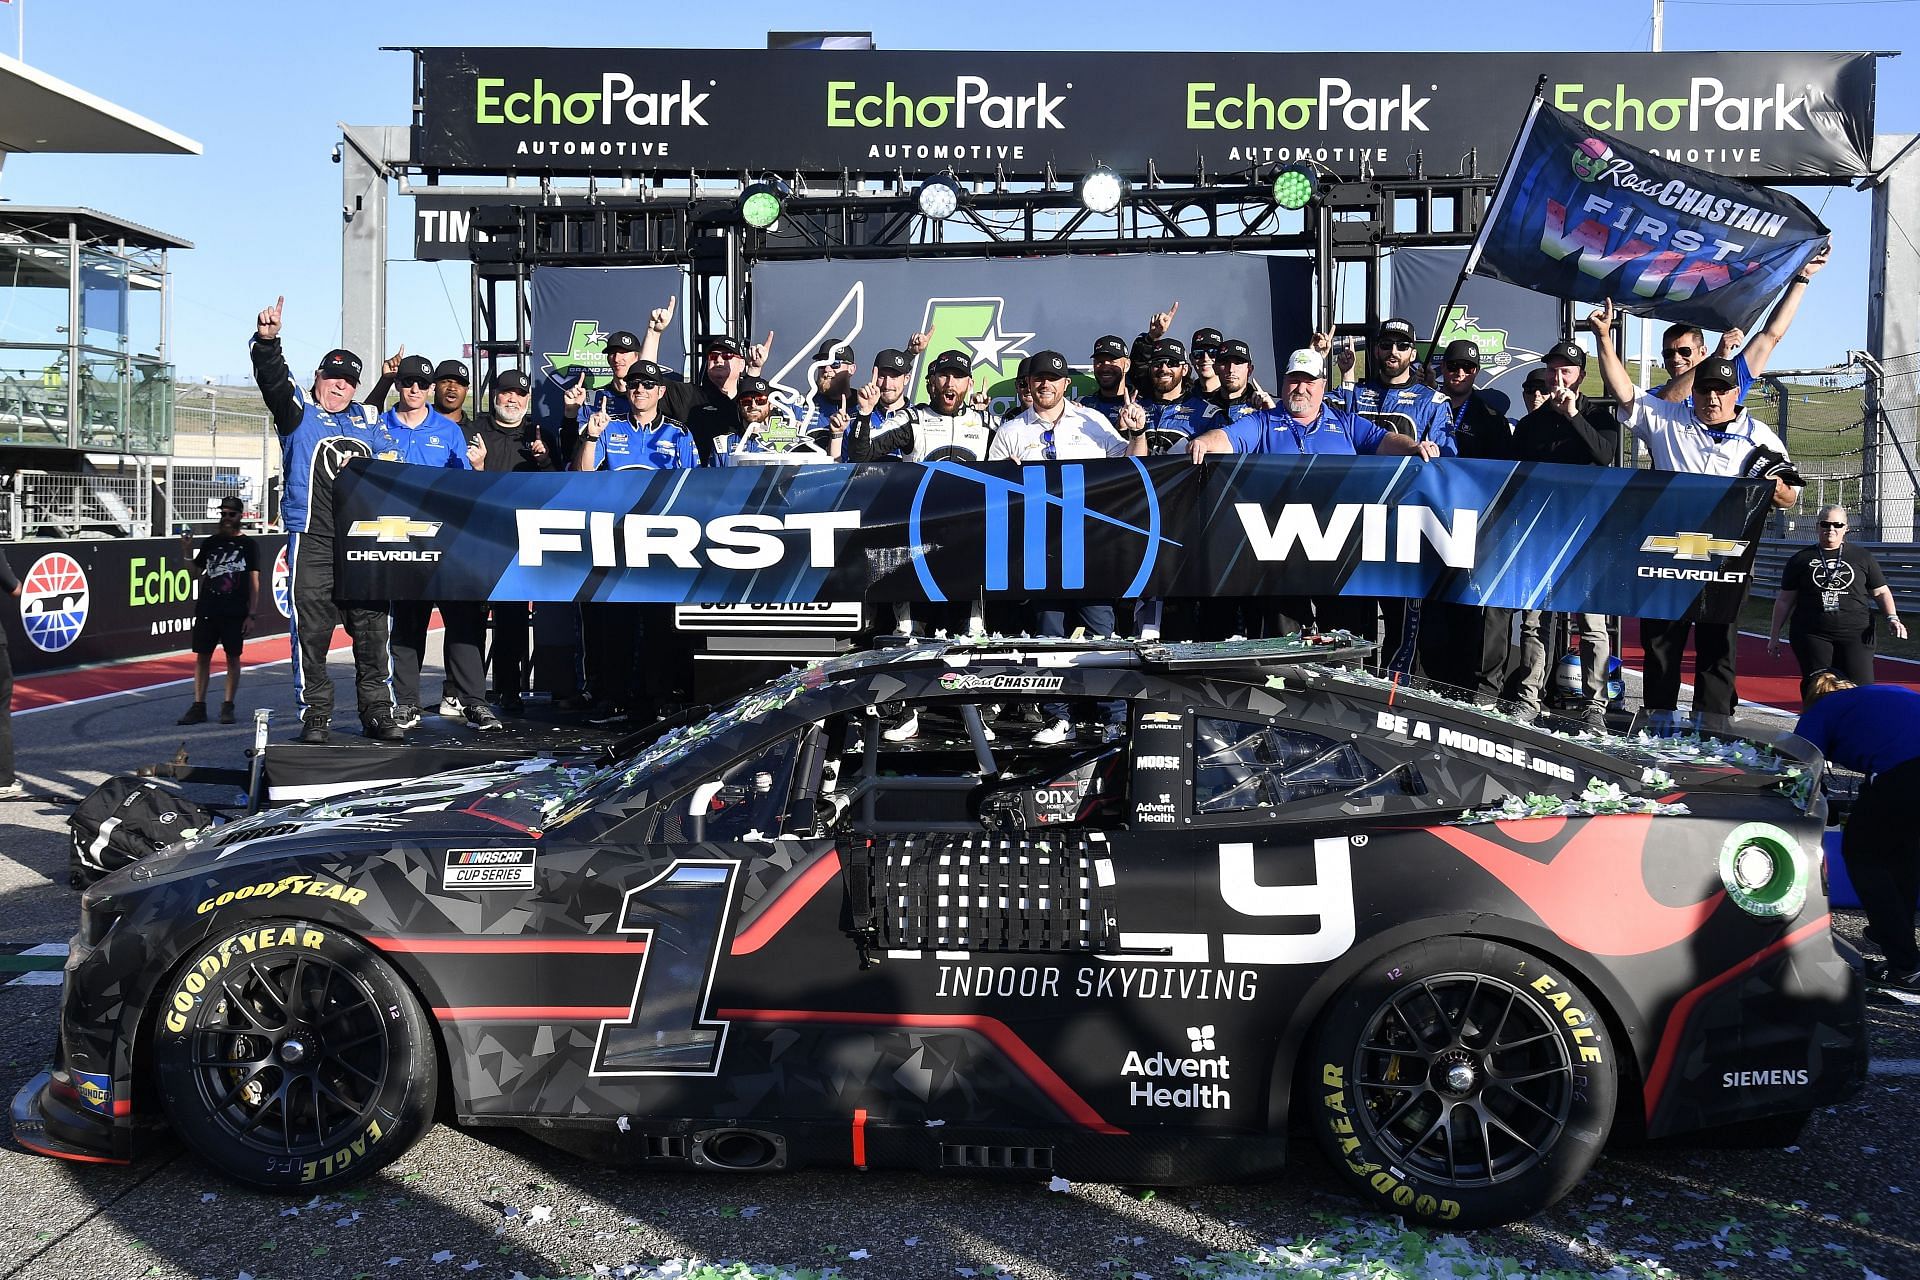 Ross Chastain and the Trackhouse Racing crew celebrate in victory lane after winning the 2022 NASCAR Cup Series Echopark Automotive Texas Grand Prix. (Photo by Logan Riely/Getty Images)